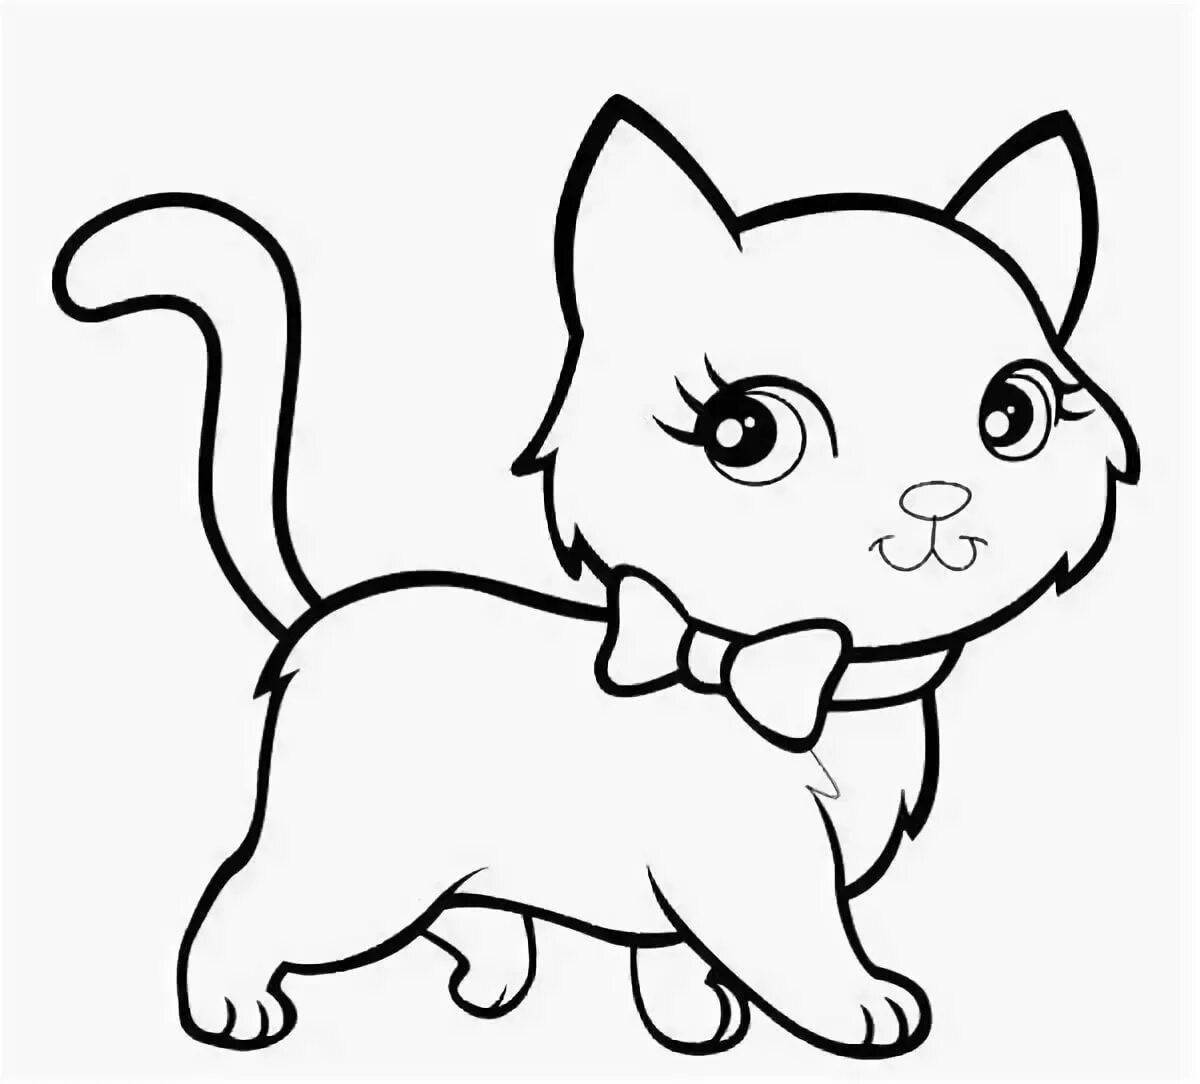 Fun coloring kitty for 3-4 year olds